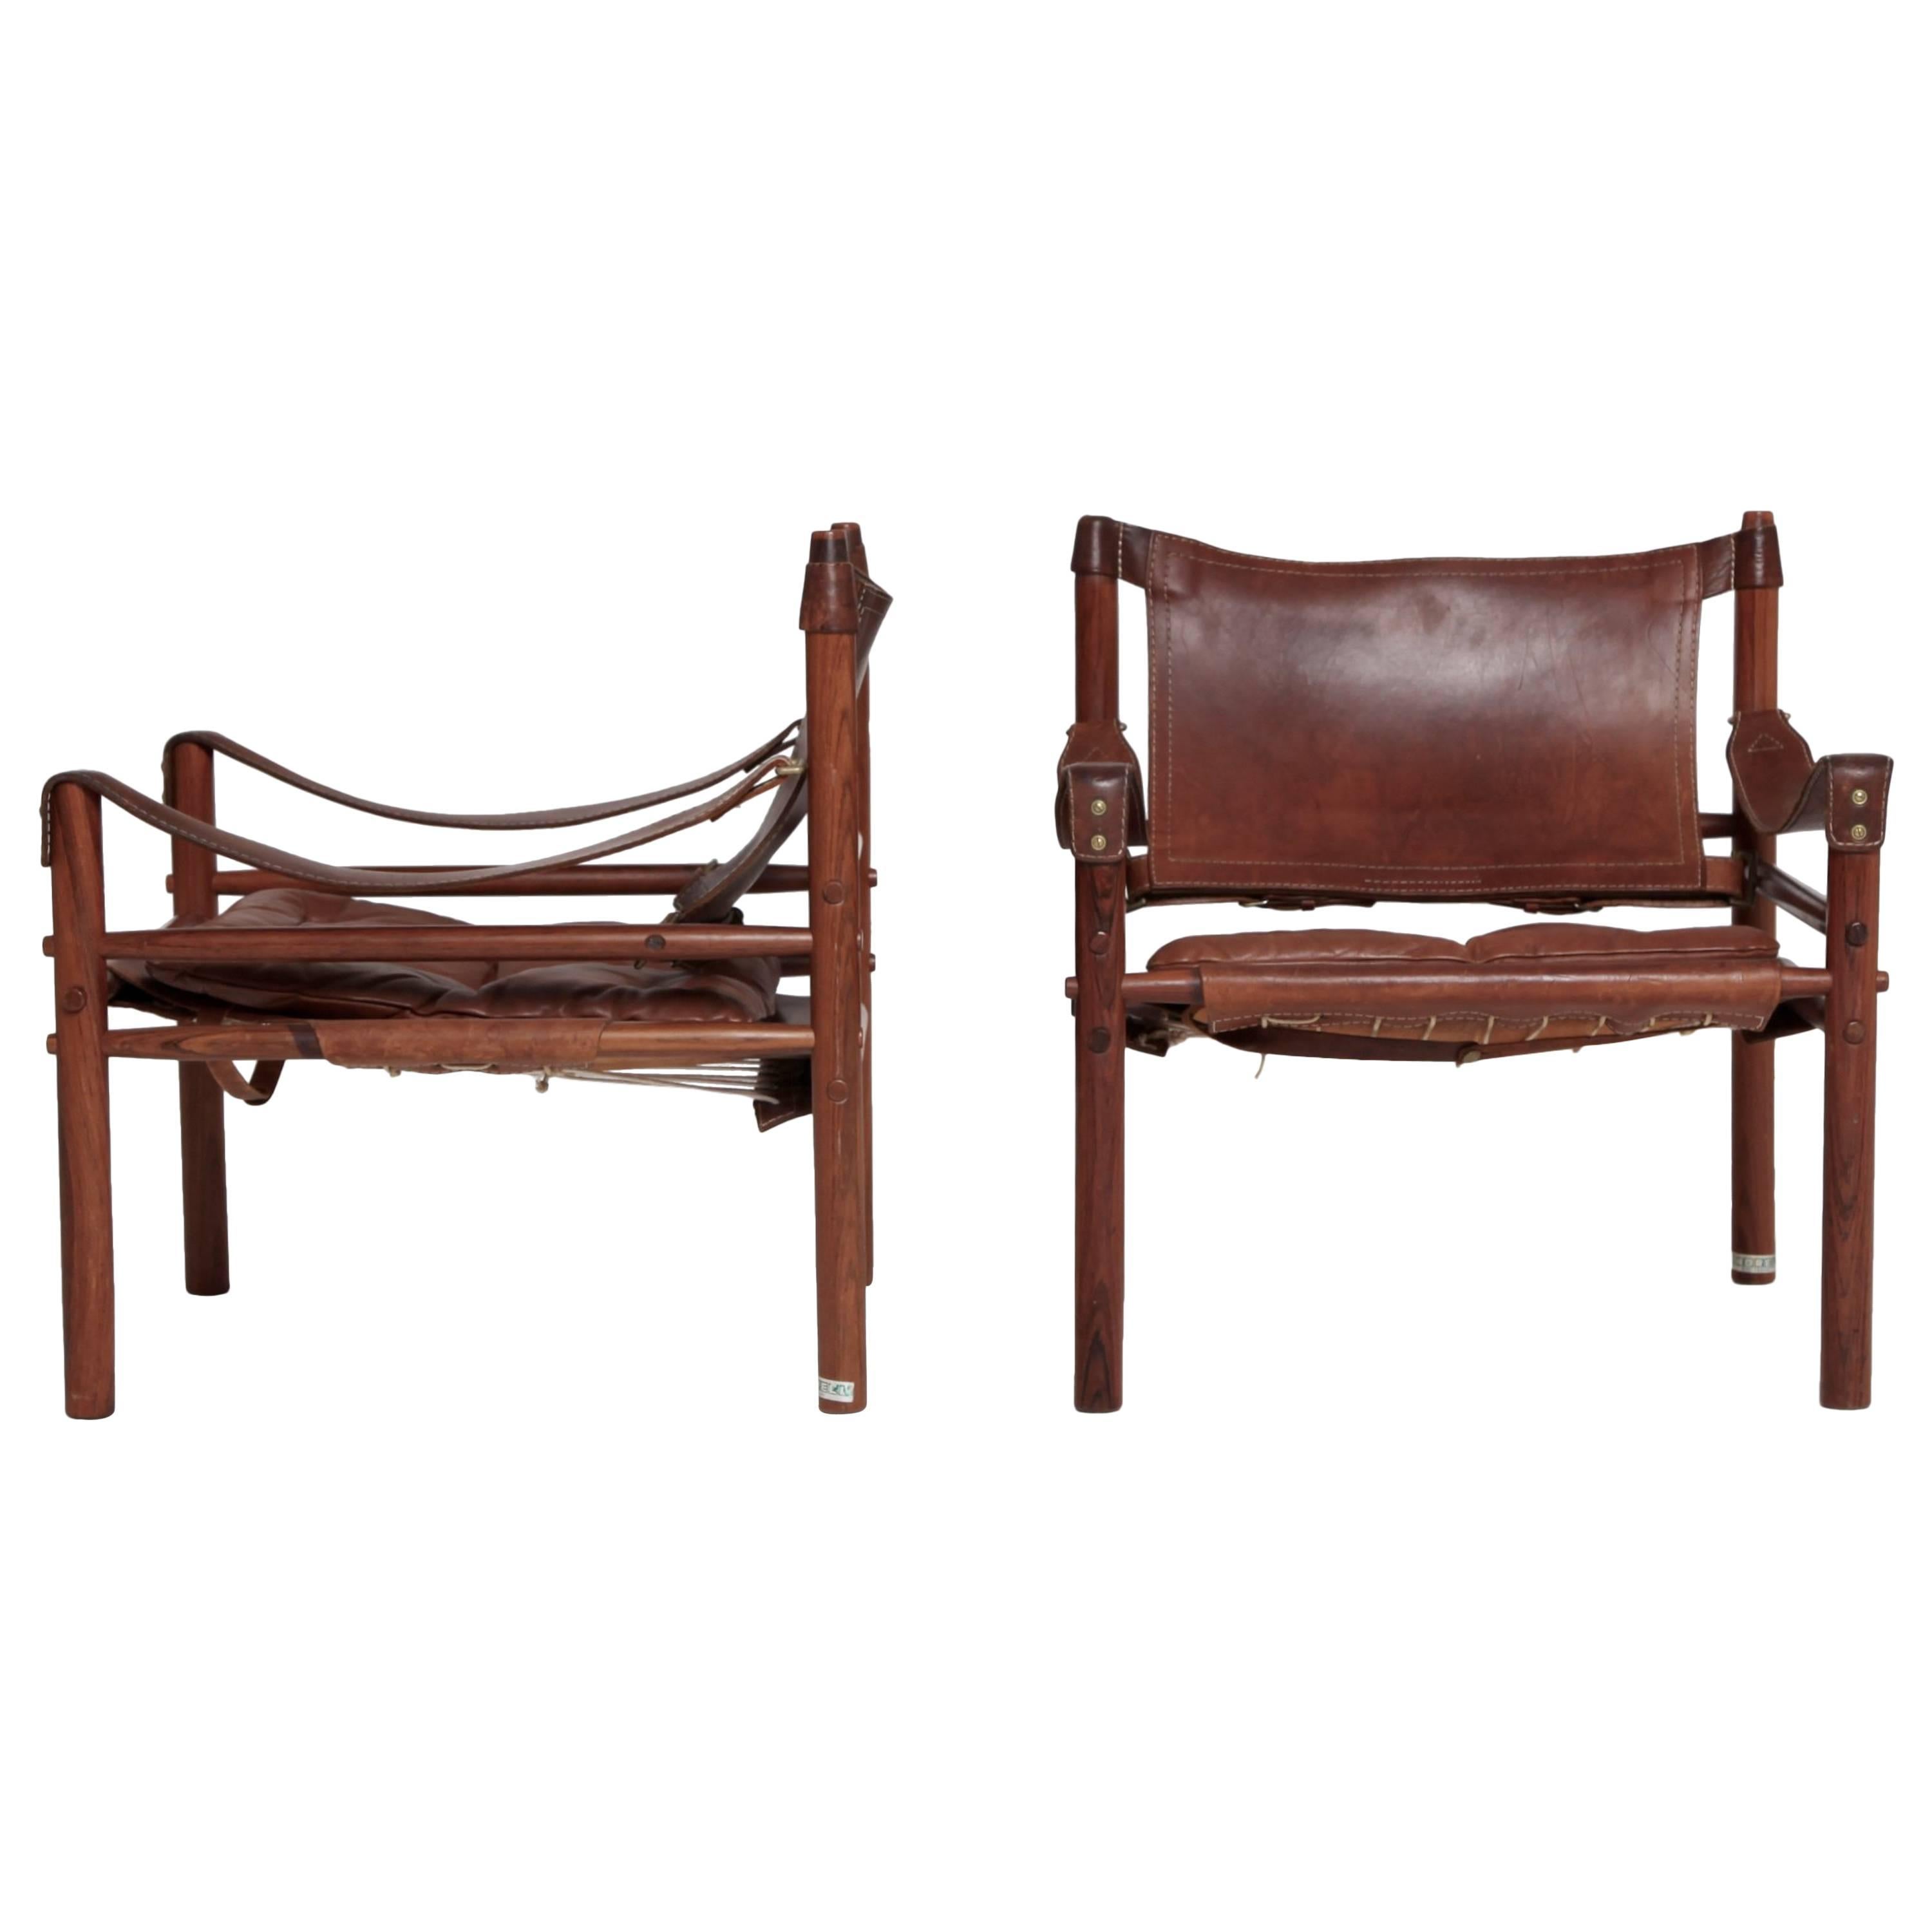 Arne Norell Rosewood and Brown Leather Safari Sirocco Chairs, Sweden, 1960s